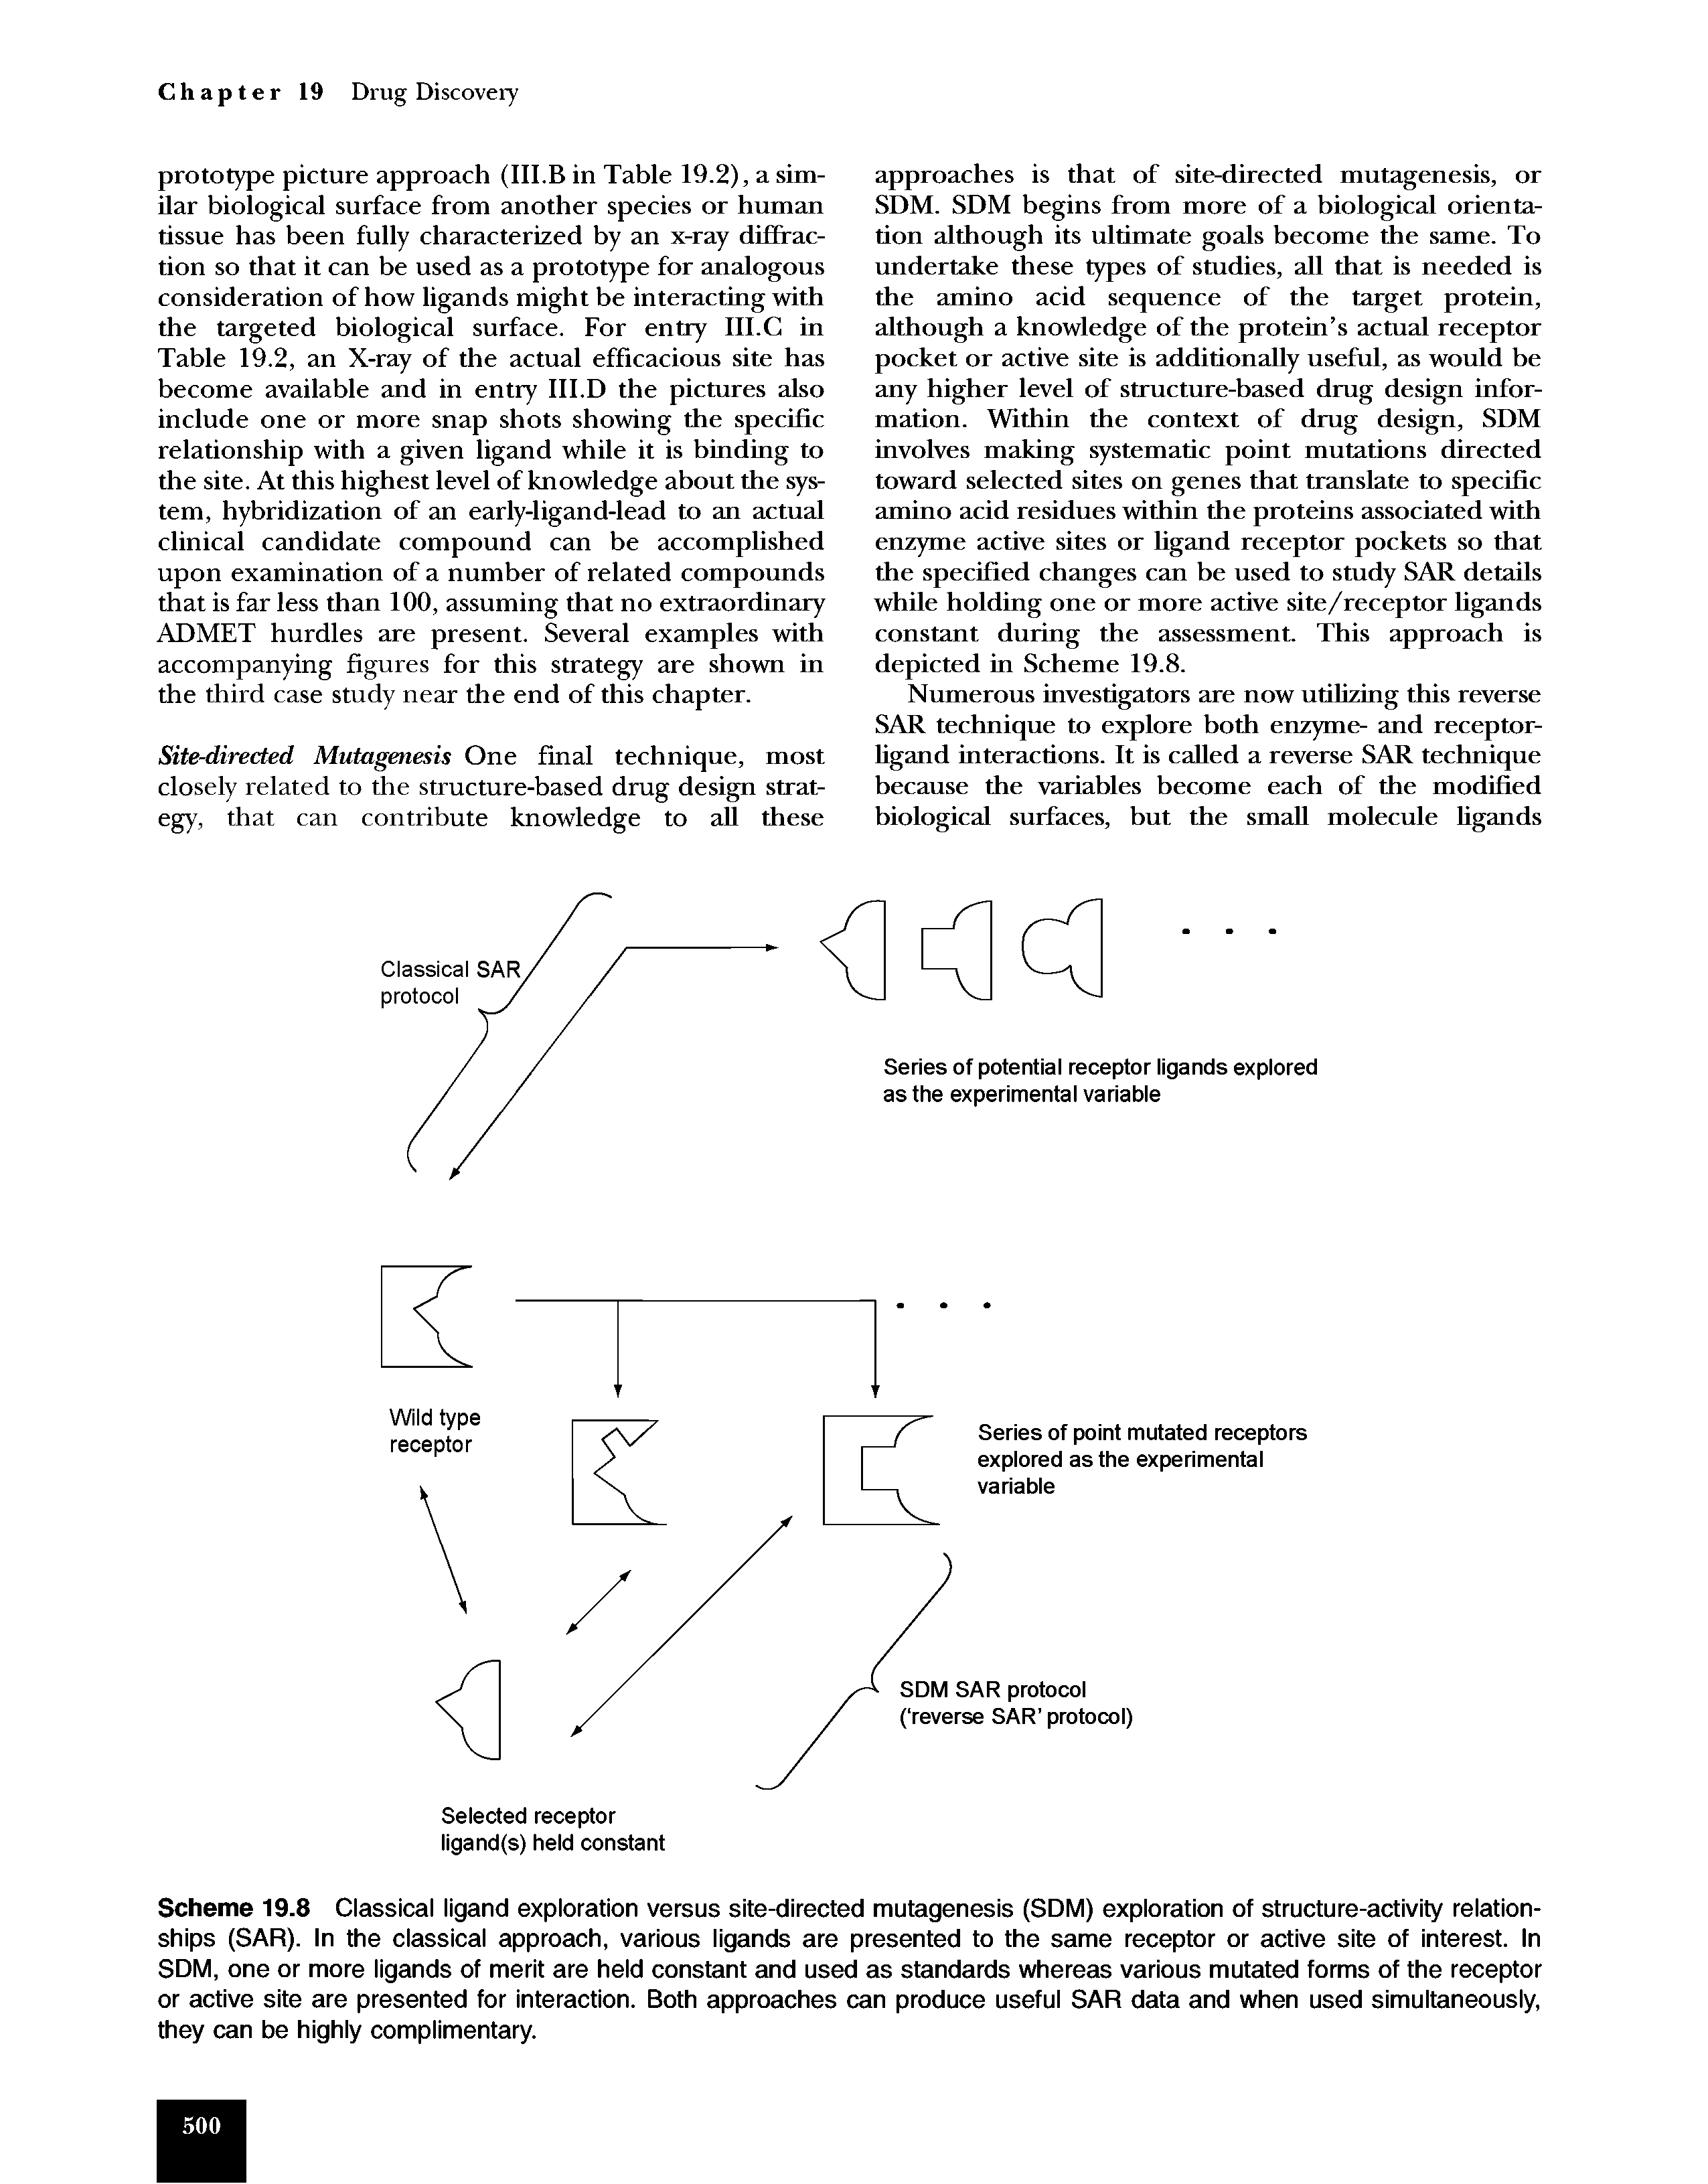 Scheme 19.8 Classical ligand exploration versus site-directed mutagenesis (SDM) exploration of structure-activity relationships (SAR). In the classical approach, various ligands are presented to the same receptor or active site of interest. In SDM, one or more ligands of merit are held constant and used as standards whereas various mutated forms of the receptor or active site are presented for interaction. Both approaches can produce useful SAR data and when used simultaneously, they can be highly complimentary.